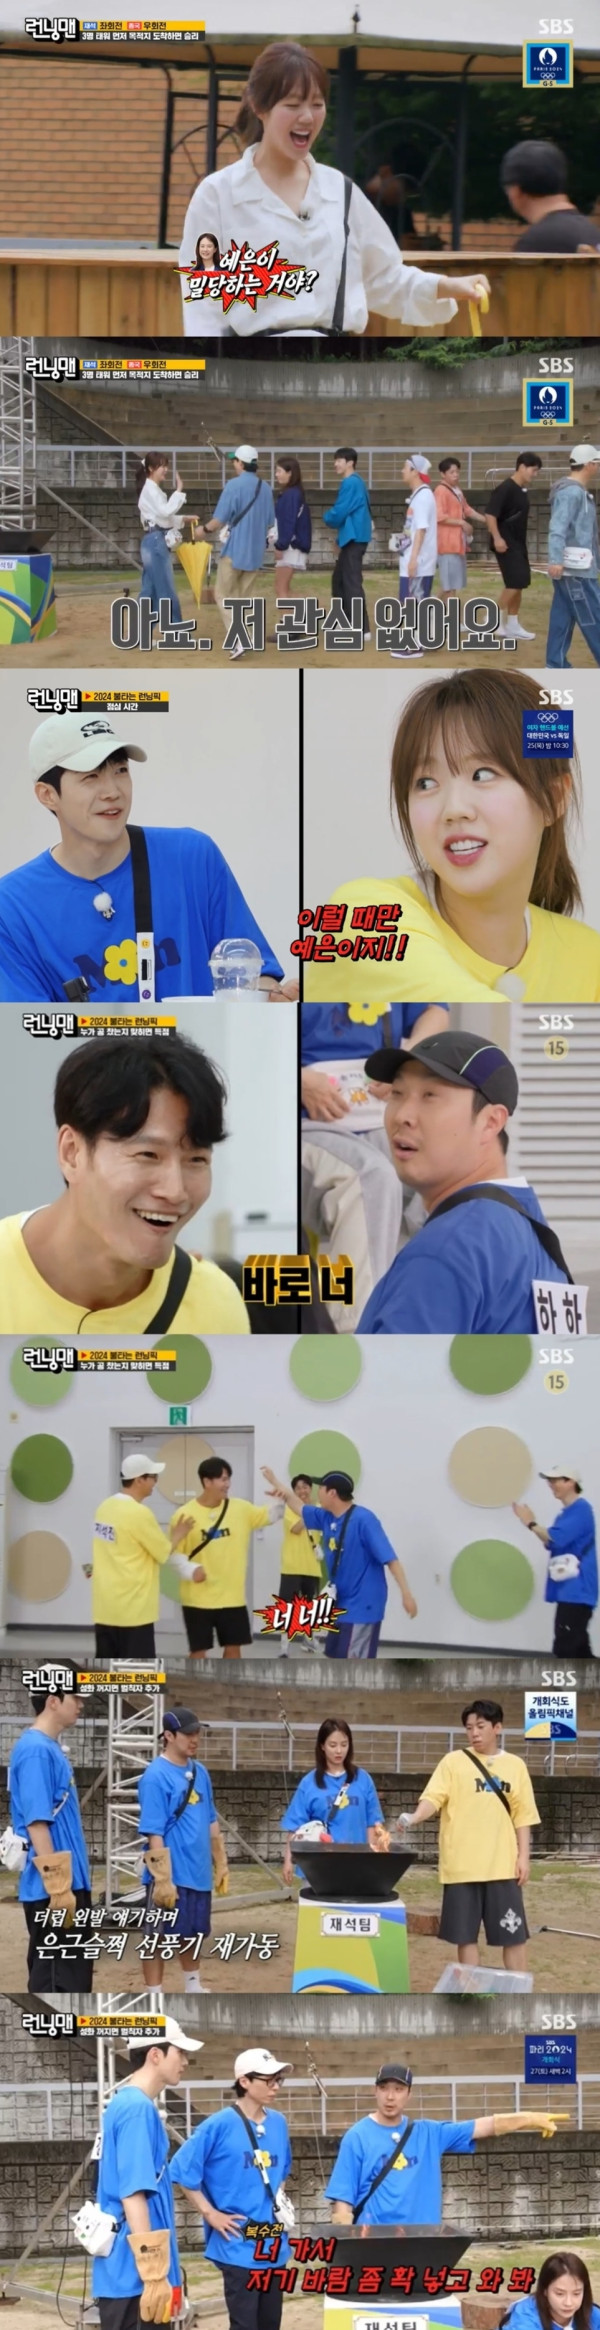 [SBS Running Man] Kang Hoon and Lee Kwang-soo's outstanding performance captured both laughs and viewer ratings!